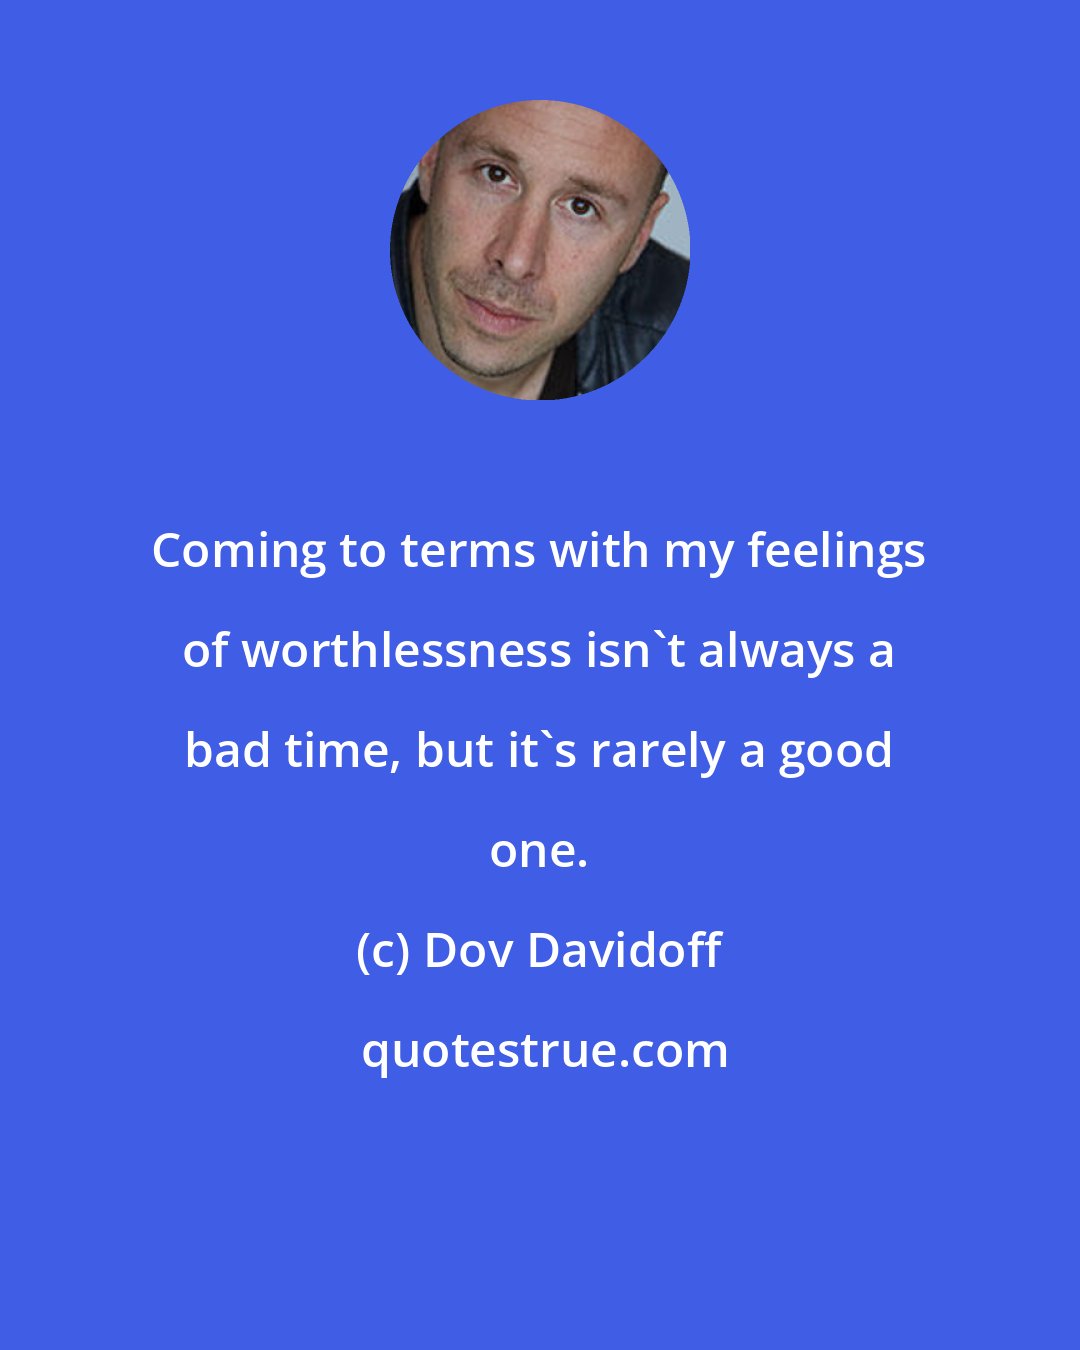 Dov Davidoff: Coming to terms with my feelings of worthlessness isn't always a bad time, but it's rarely a good one.